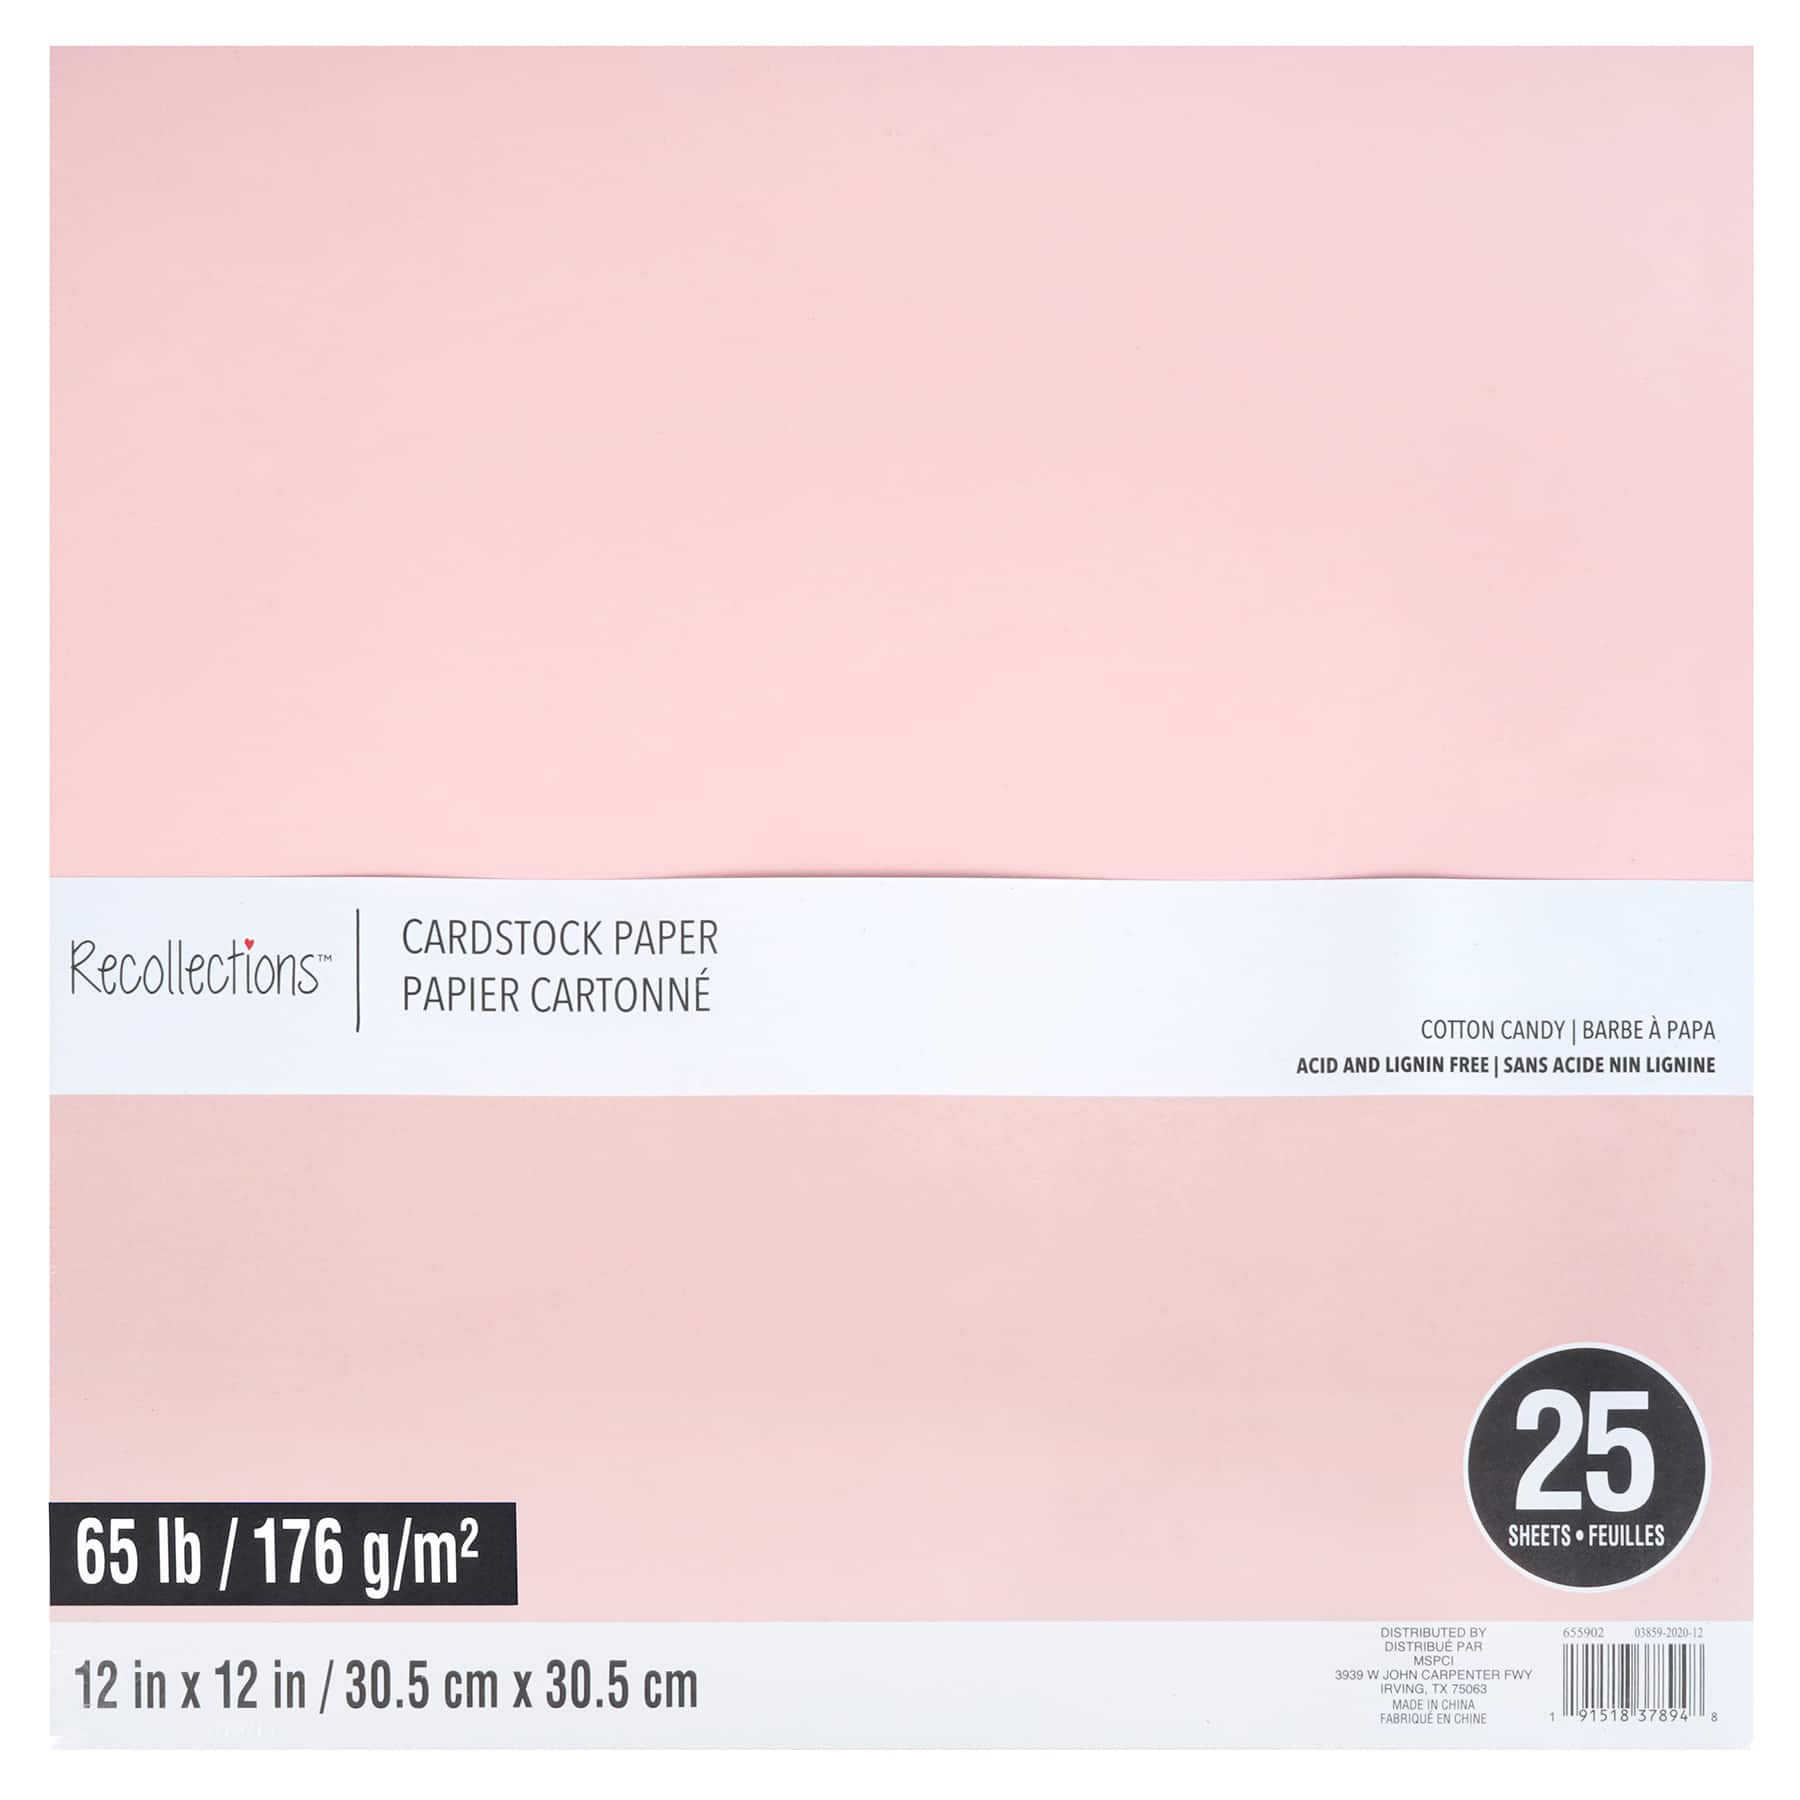 Popular Pink Razzle Berry 12x12 (Square) Paper 65C Lightweight Cardstock - 50 Pk -- Econo 12-x-12 Square Card Stock Paper - Business and DIY Projects